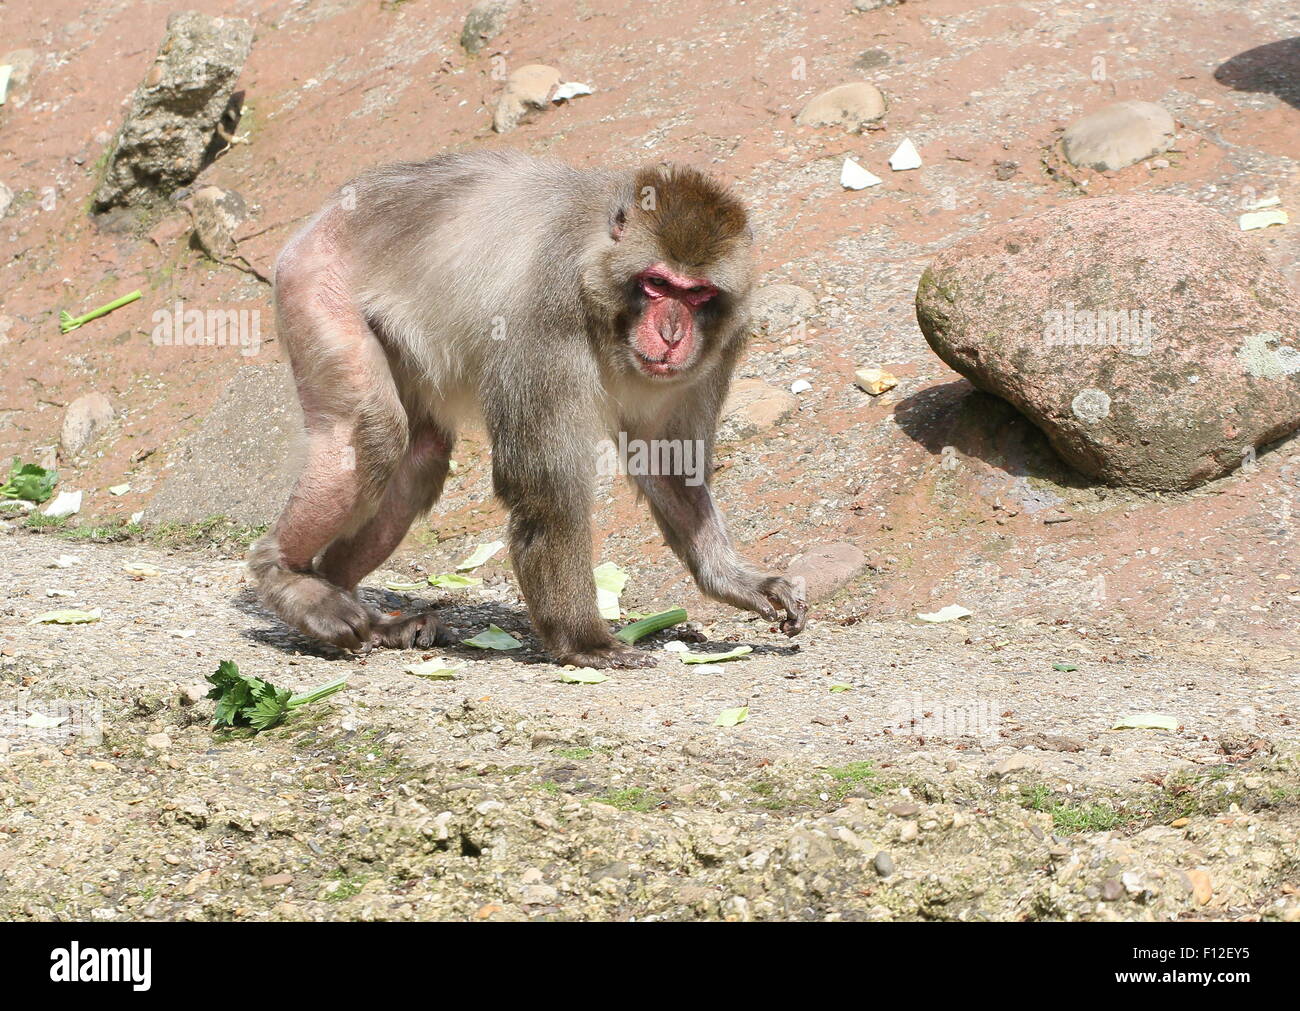 Mature male Japanese macaque or Snow monkey (Macaca fuscata) walking by at close range Stock Photo